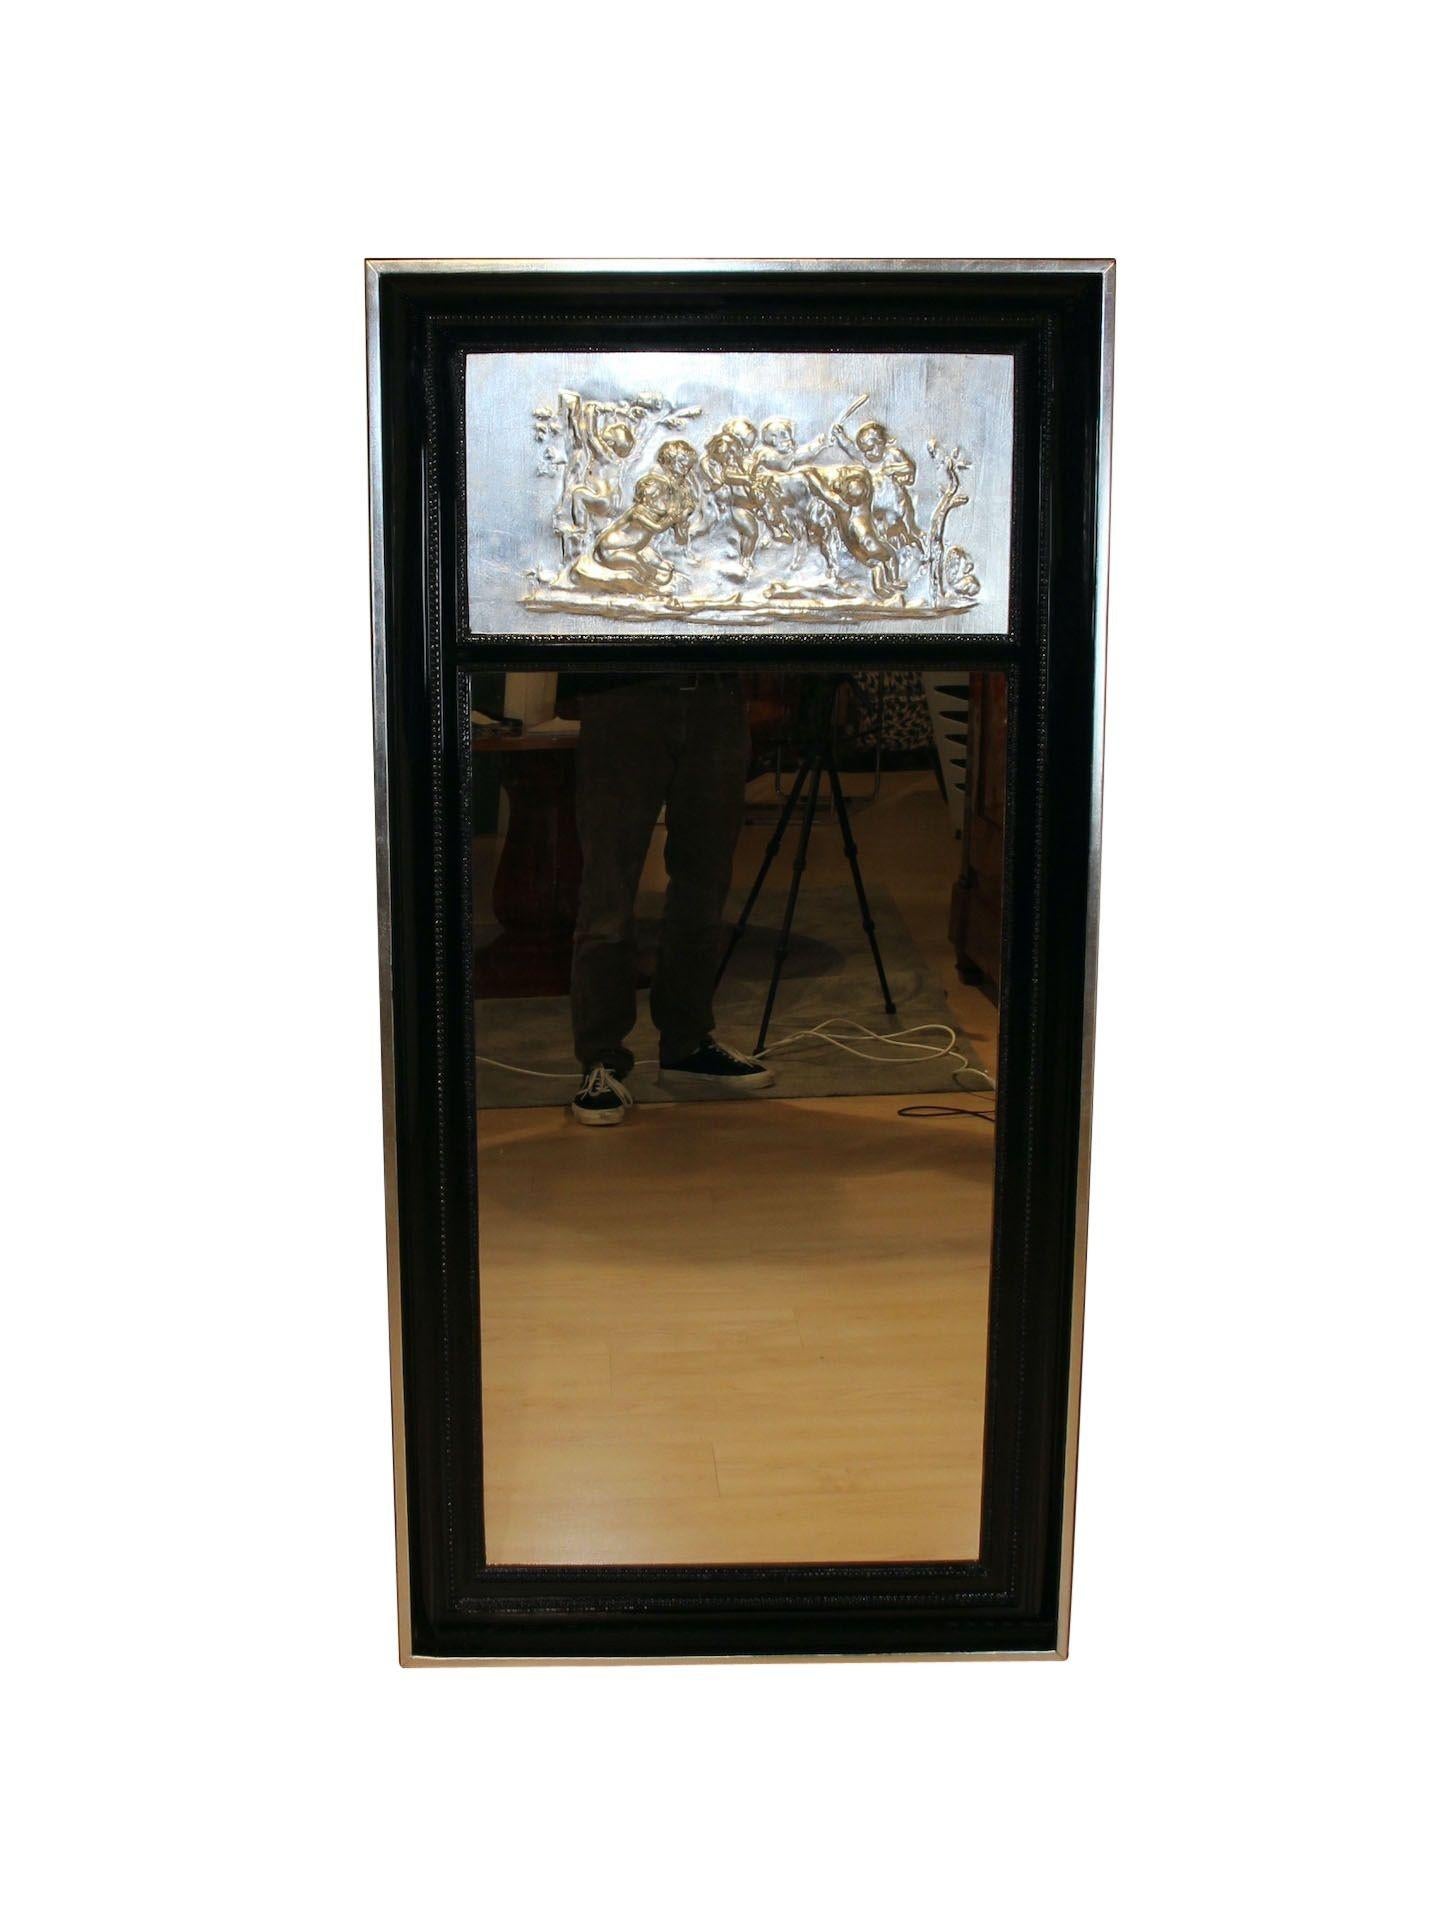 Large Art Deco Pillar Mirror, Black Lacquer and Silver-Leaf, France circa 1920.
Black piano lacquer wood. Hollow frame with two beaded strips.
Above, silver-leaf plated plaster decoration of a putti scene. Outer rim with silver leaf plate